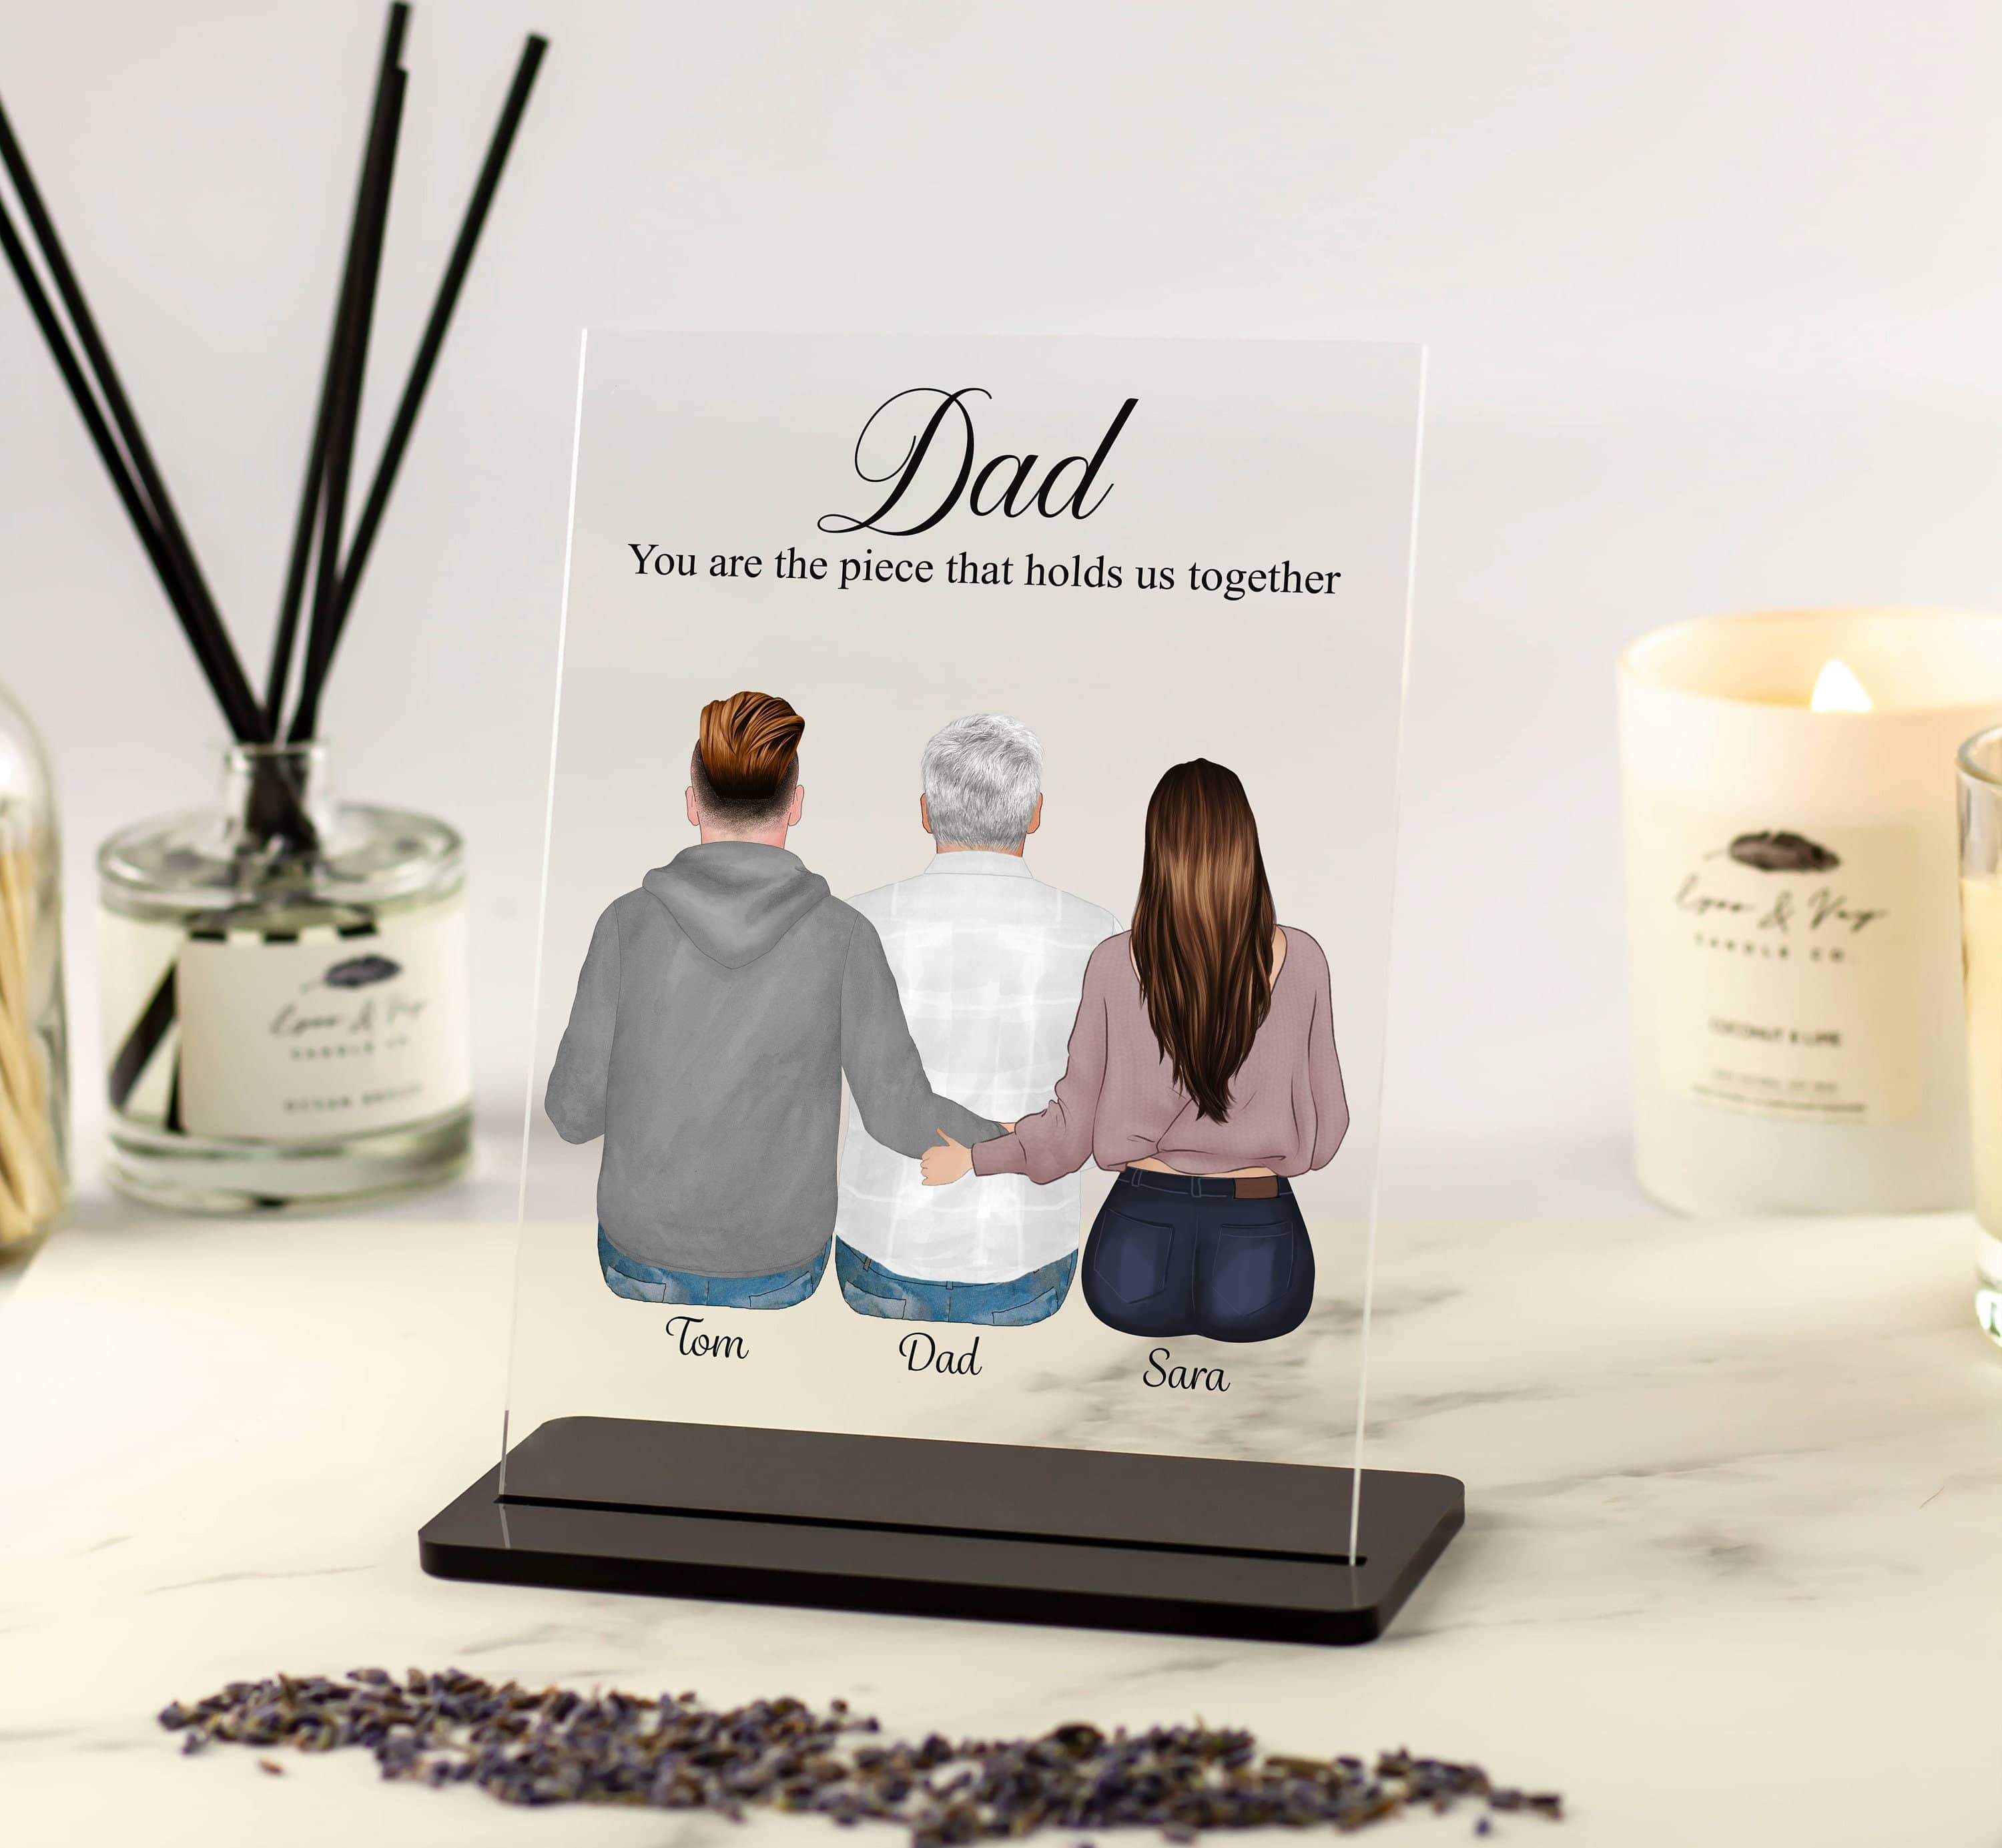 Fathers Day Gifts, Personalised Gift for Dad from Son, Daughter Custom Portrait, Father's Day Unique Gift, Birthday Grandad Acrylic Plaque